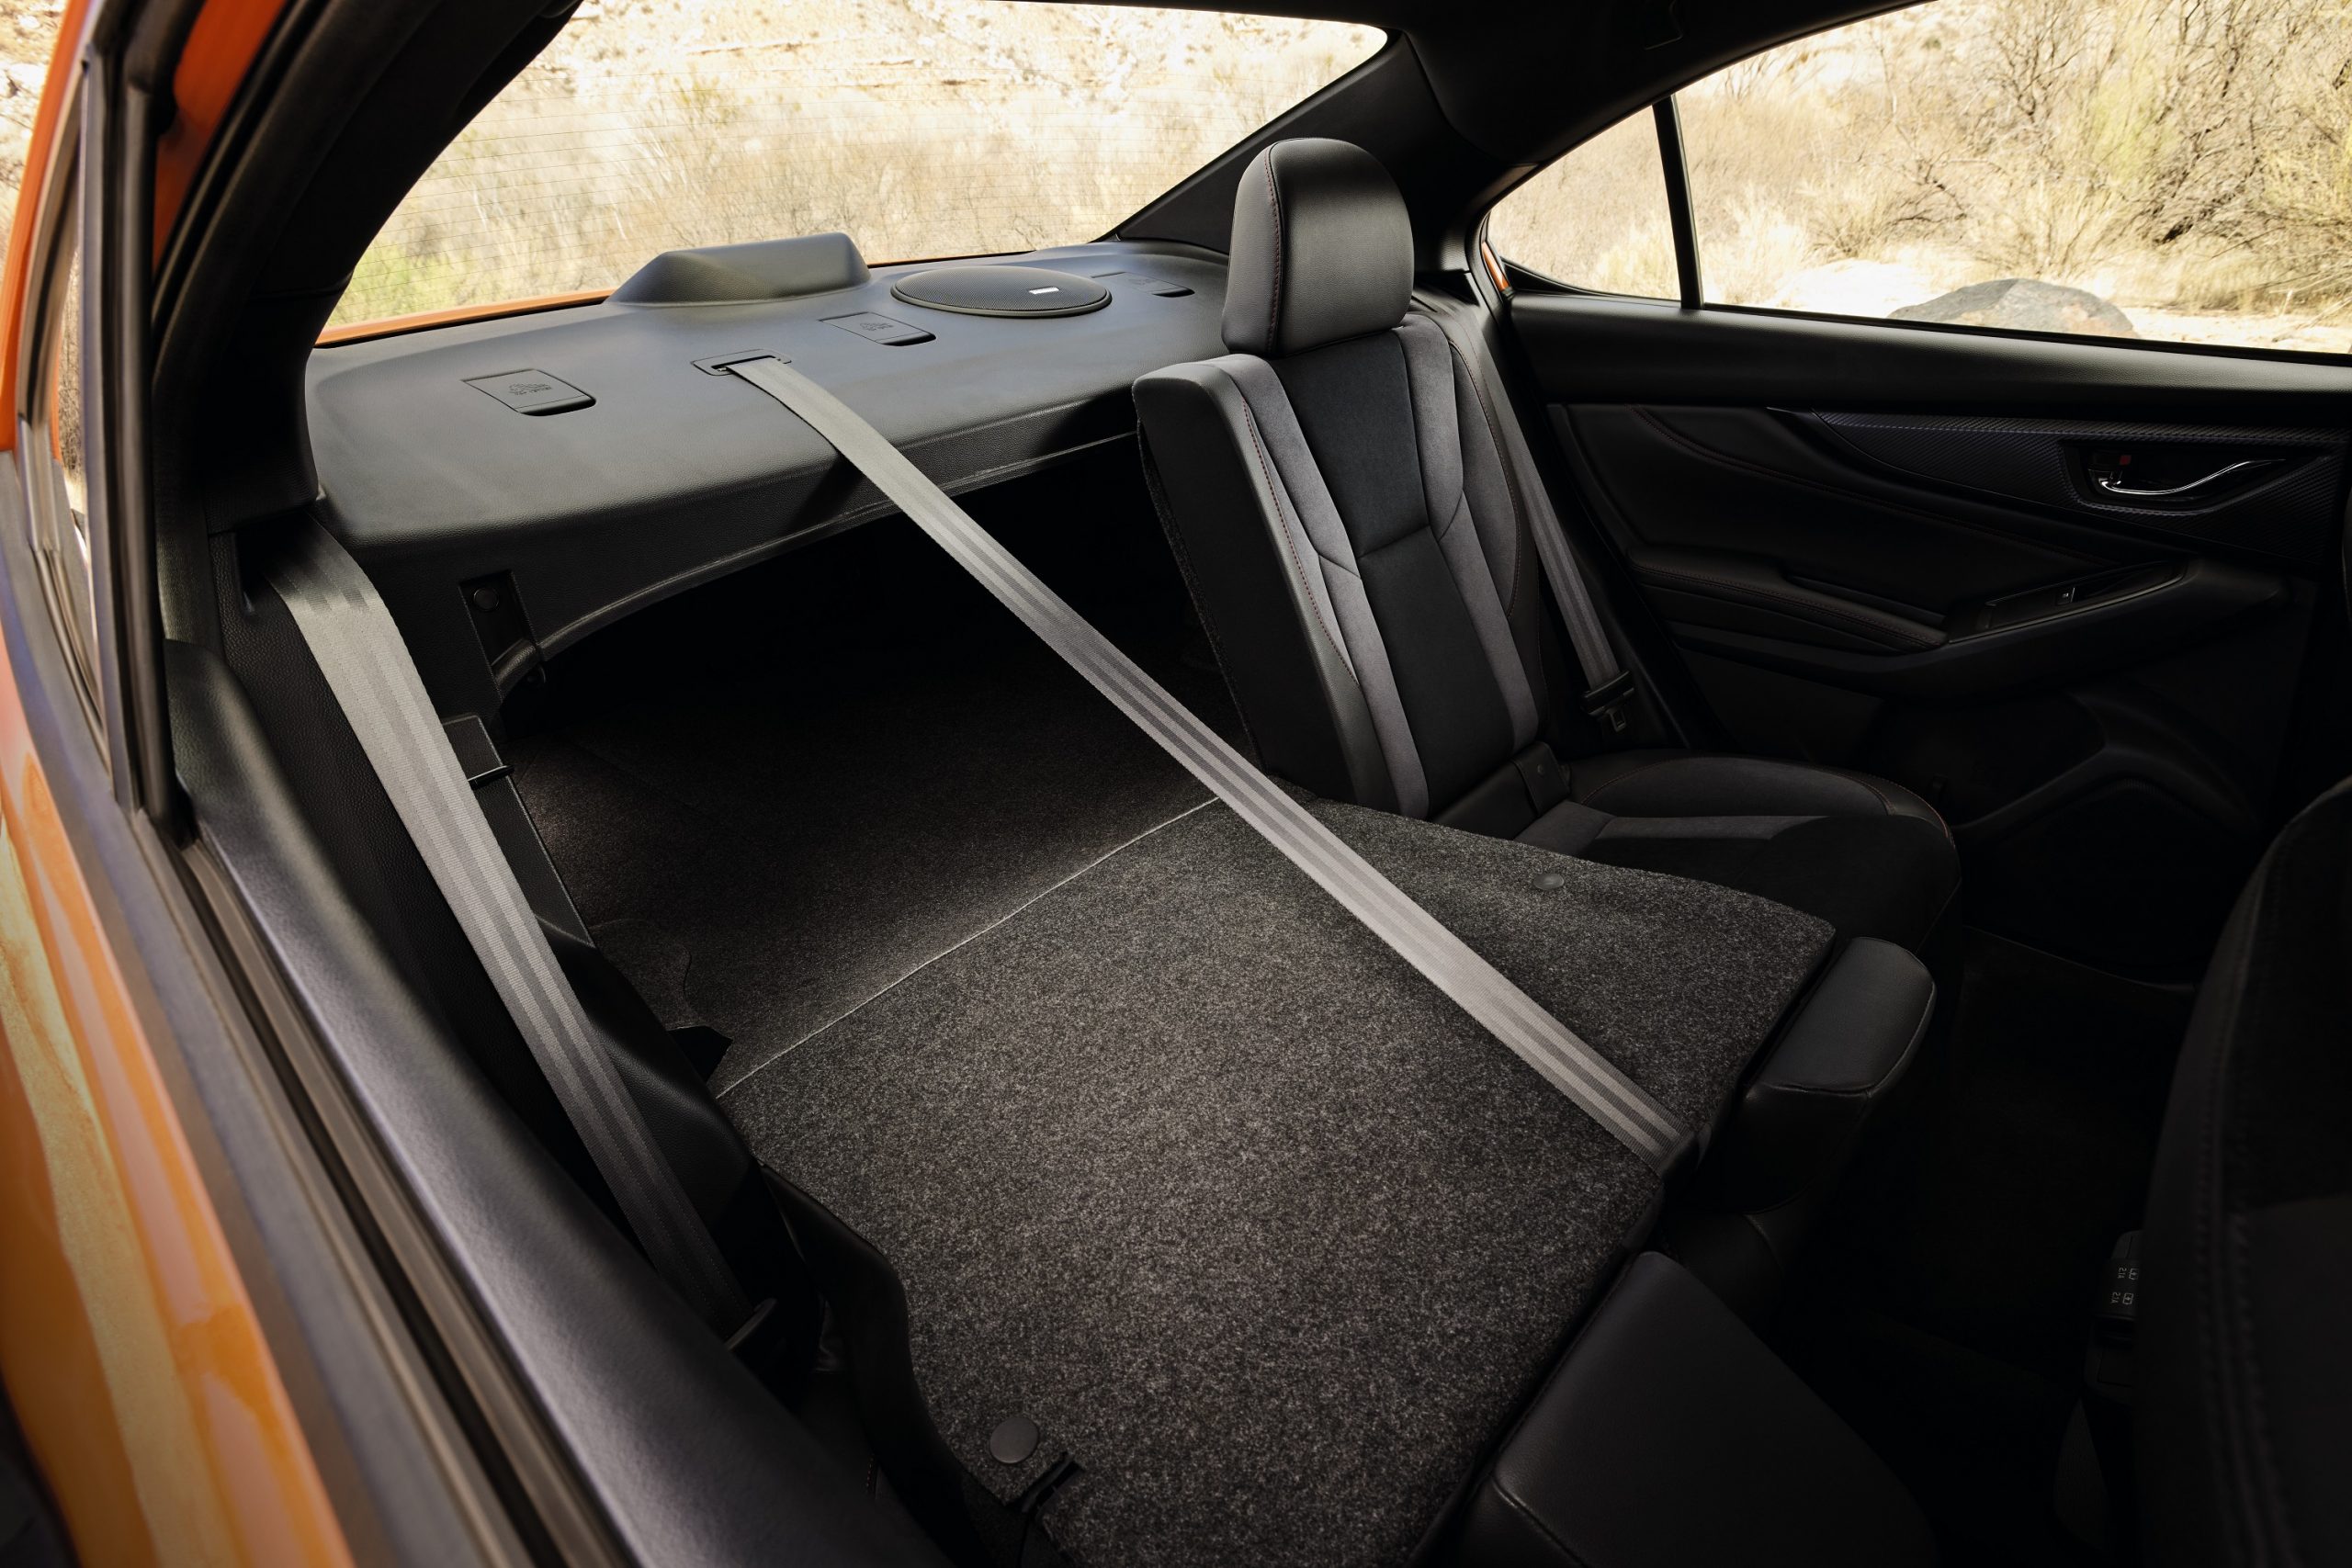 The rear passenger space of the WRX with the seats down